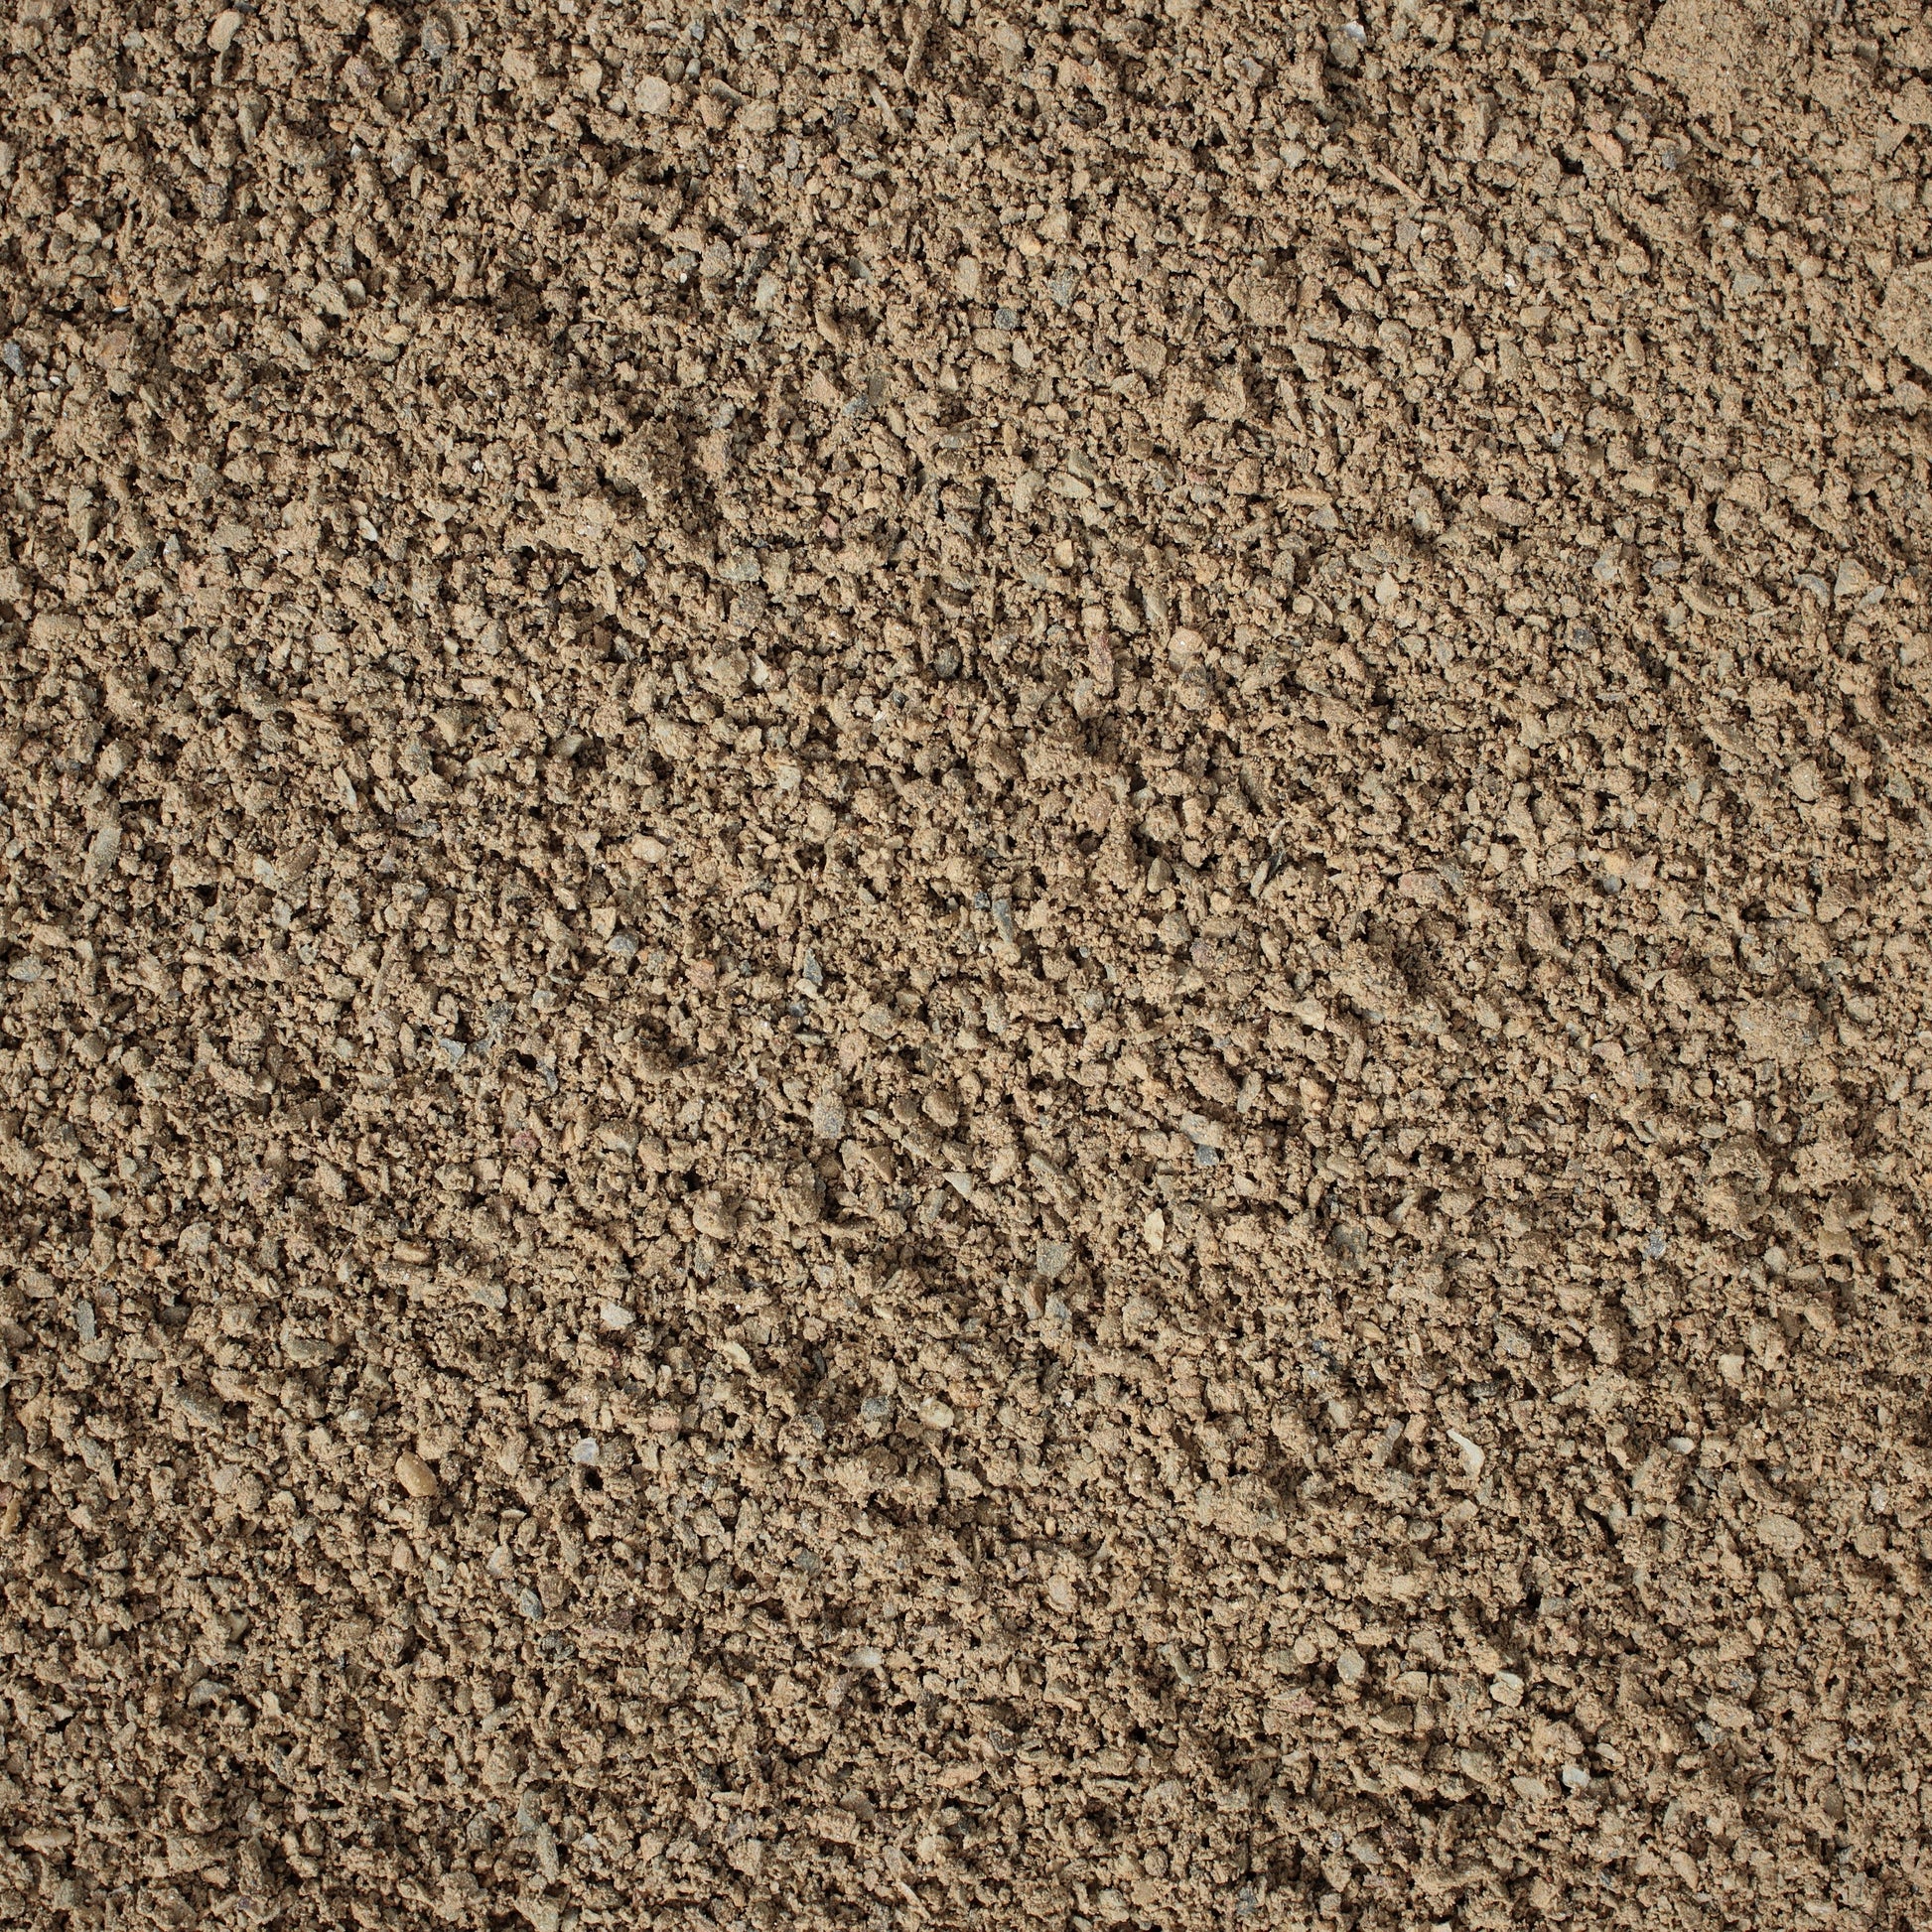 Overhead view of Lolo crusher fines gravel available from Missoula Dirt Delivery